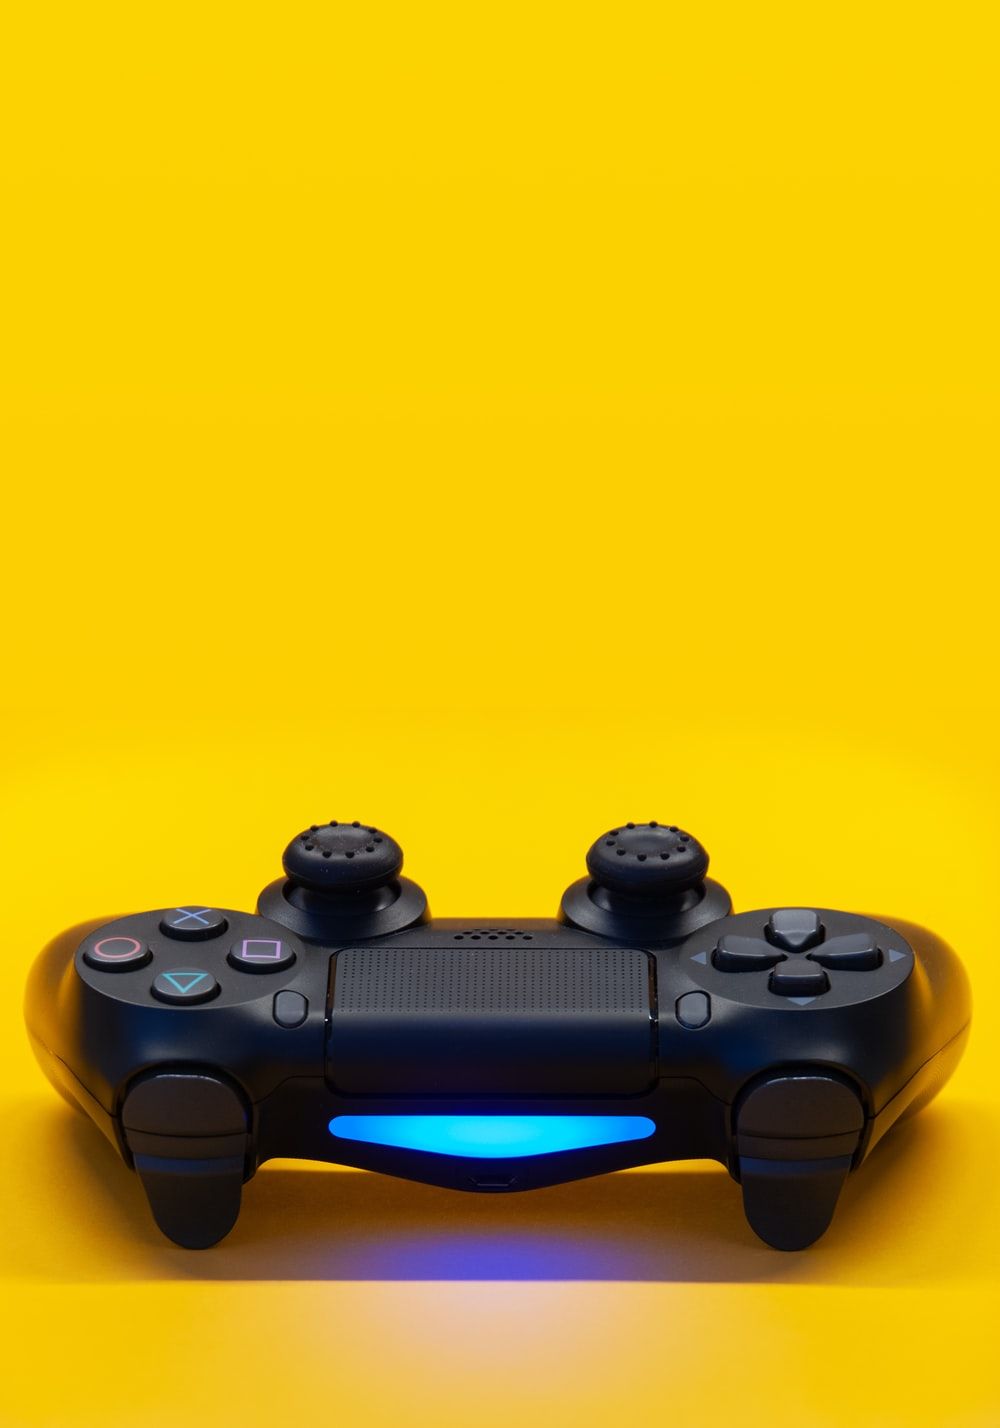 Gamepad Picture. Download Free Image